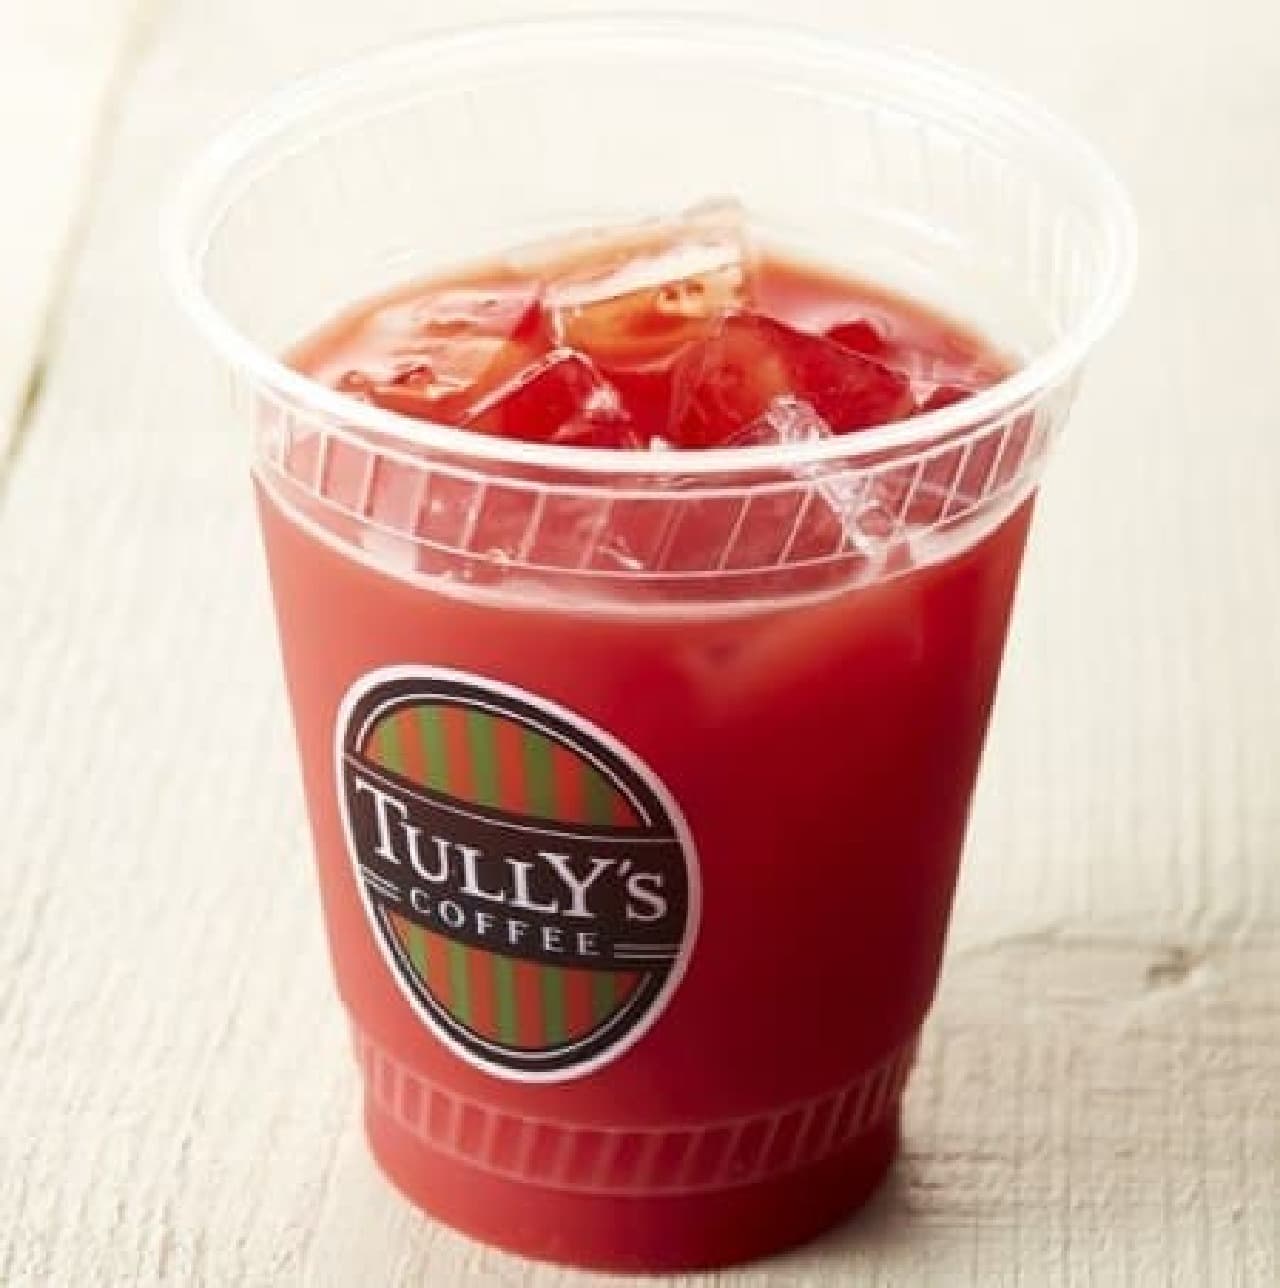 Tully's Coffee "Watermelon Squeeze 100%"